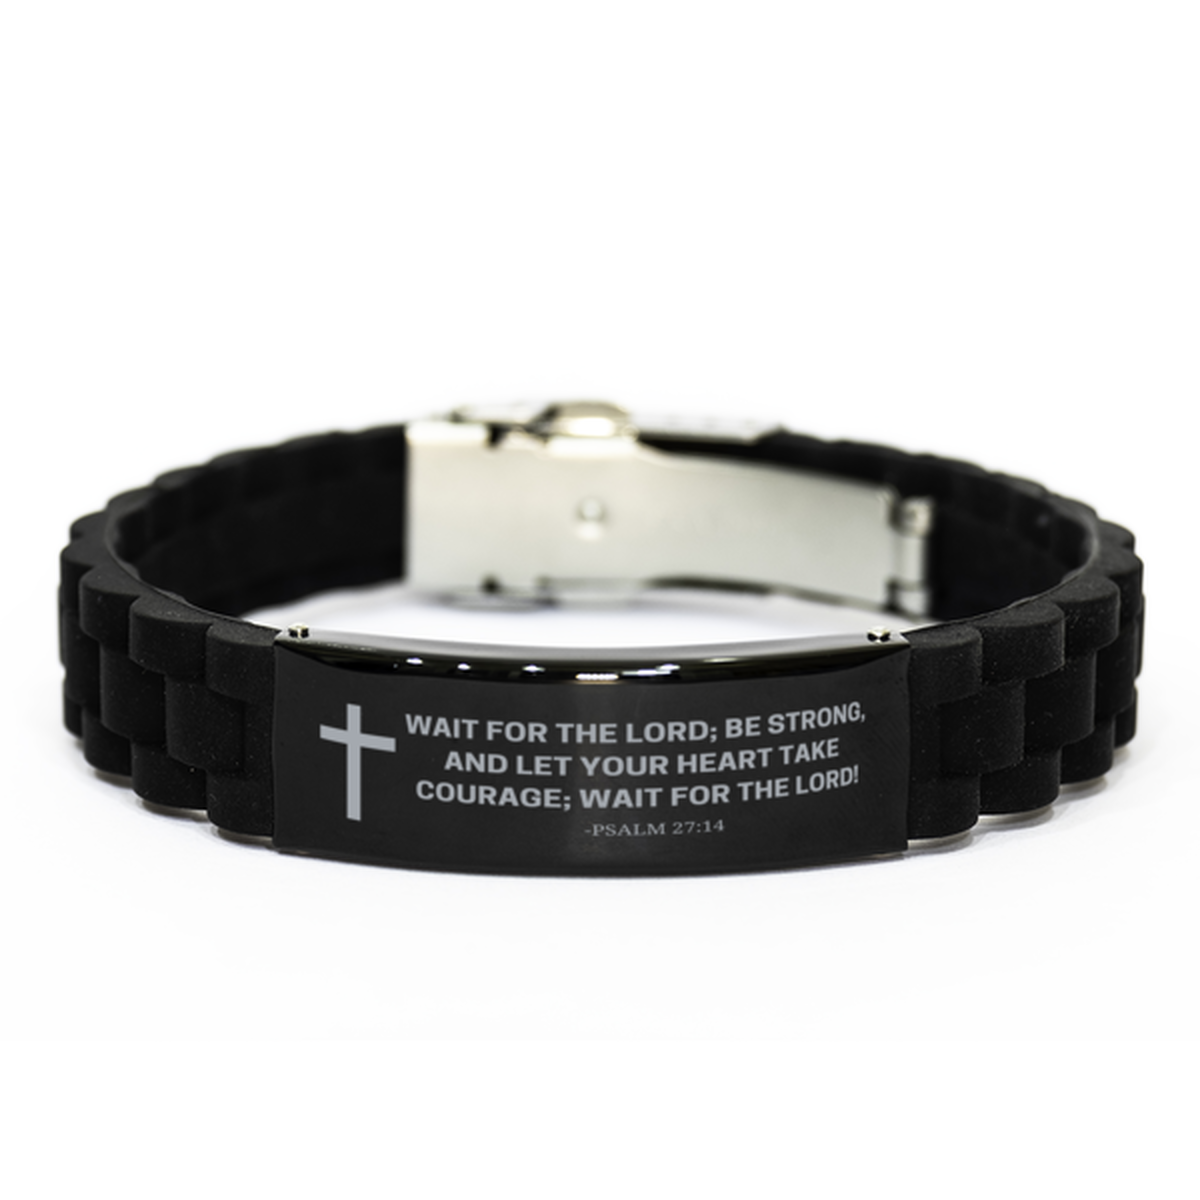 Baptism Gifts For Teenage Boys Girls, Christian Bible Verse Black Glidelock Clasp Bracelet, Wait for the Lord, Catholic Confirmation Gifts for Son, Godson, Grandson, Nephew